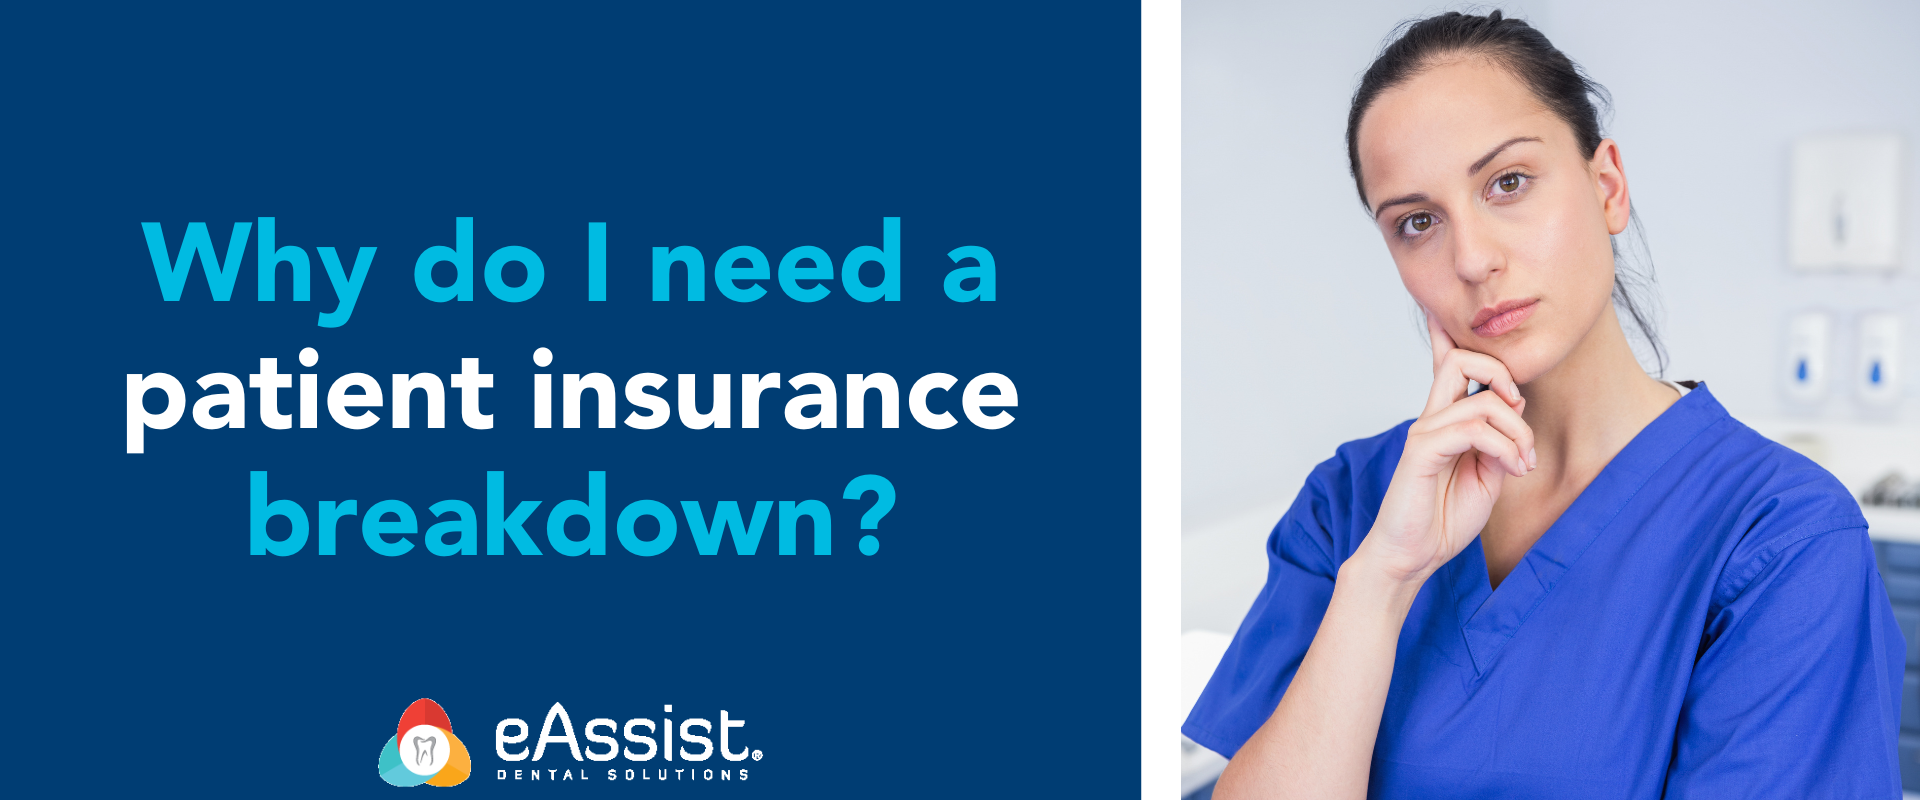 Why do I need a patient insurance breakdown?